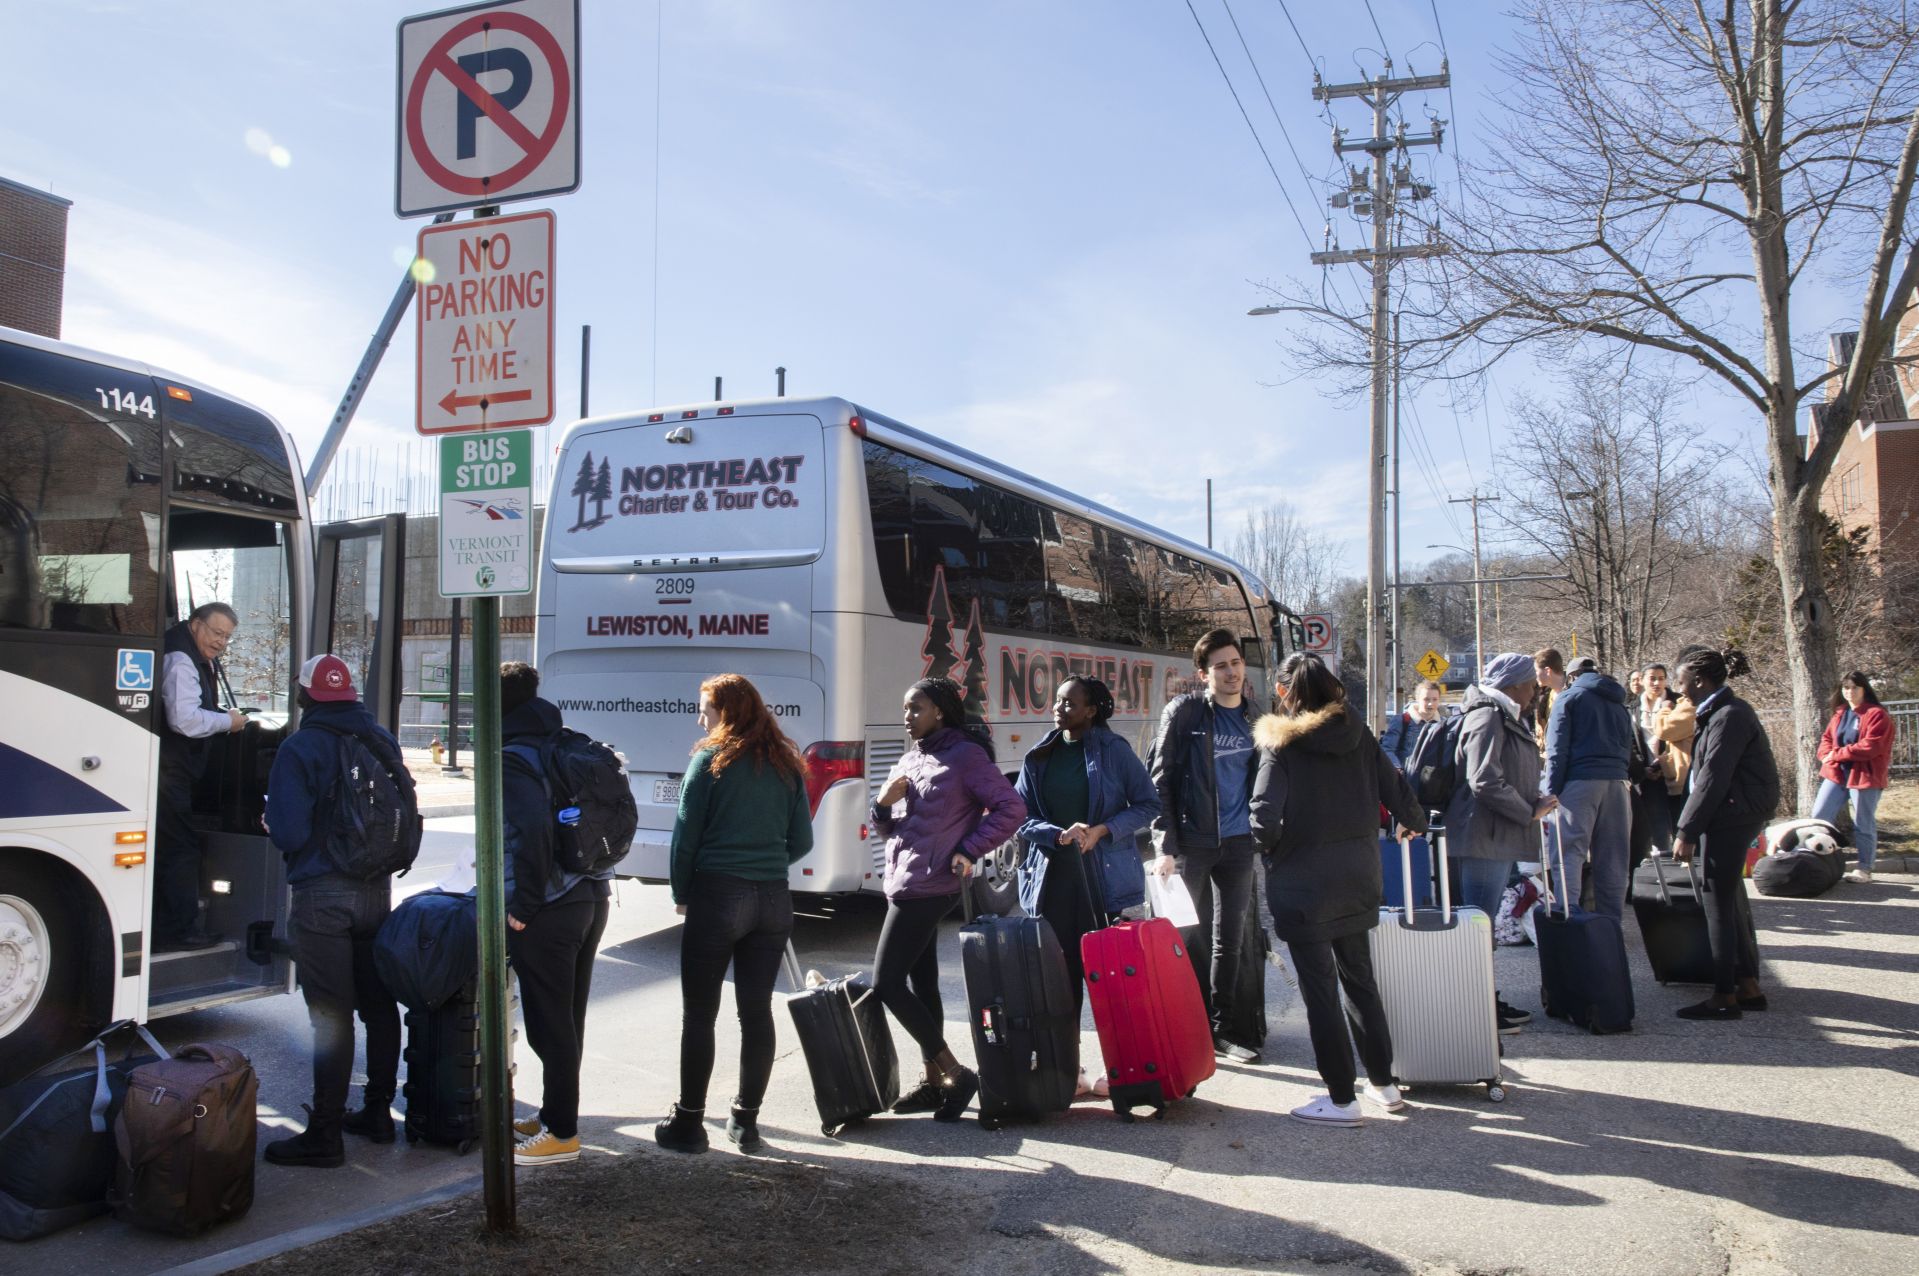 Students gather in front of Chase Hall to take two buses that will take them on the first leg of their trips home. One is a Concord Trailways bus, regularly scheduled daily for 3:30 p.m. pickup. The other is a bus chartered by the College.